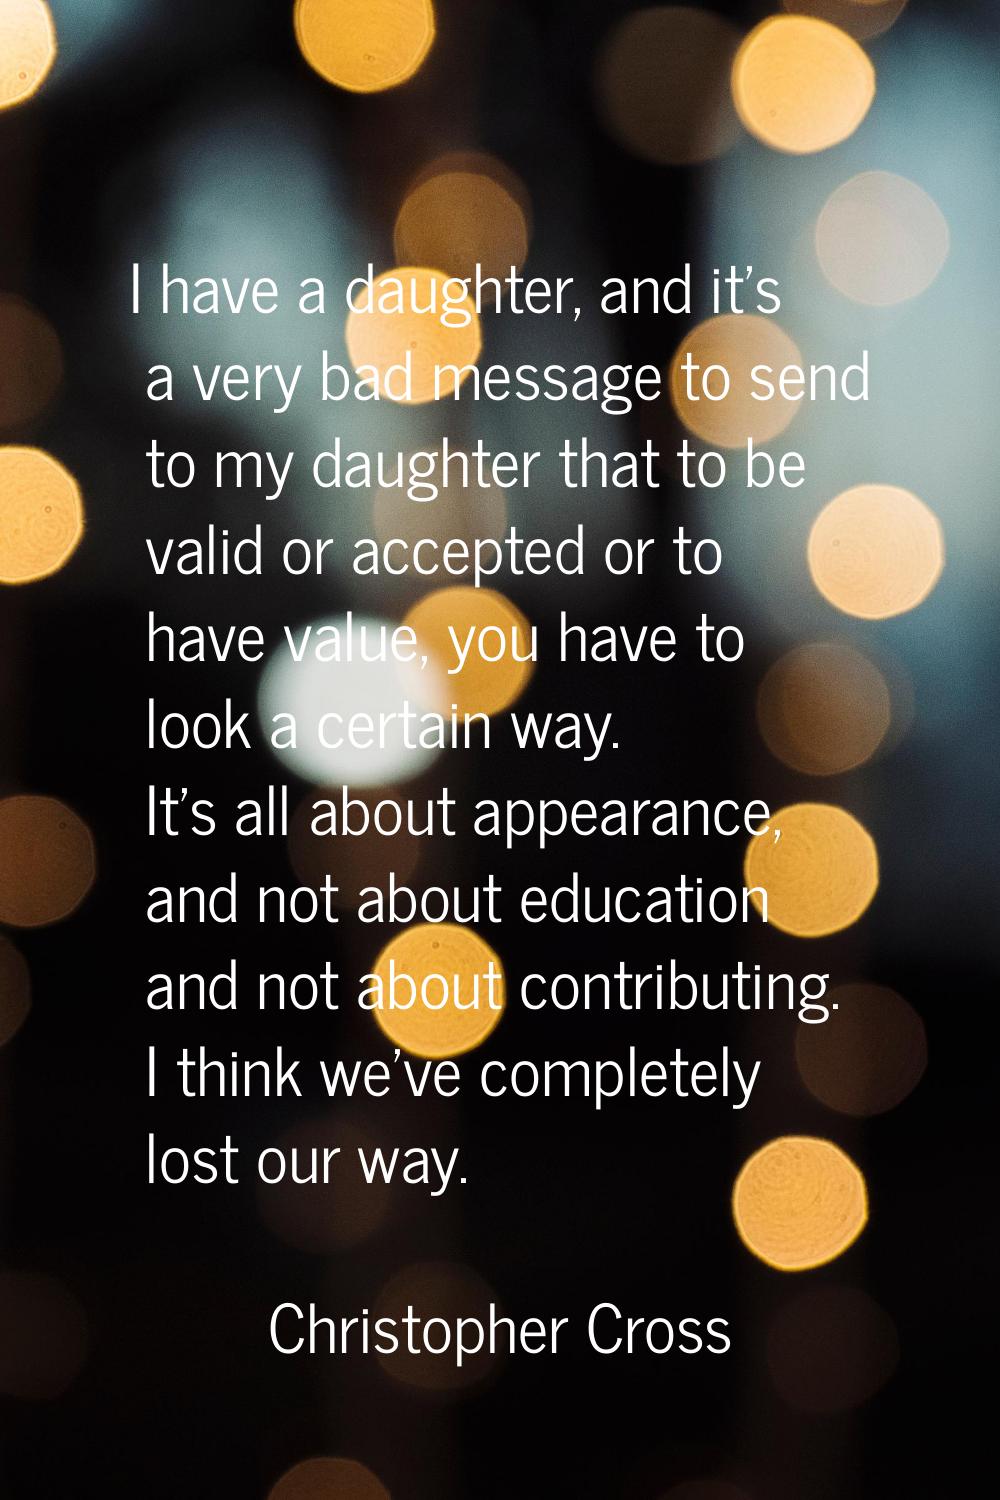 I have a daughter, and it's a very bad message to send to my daughter that to be valid or accepted 